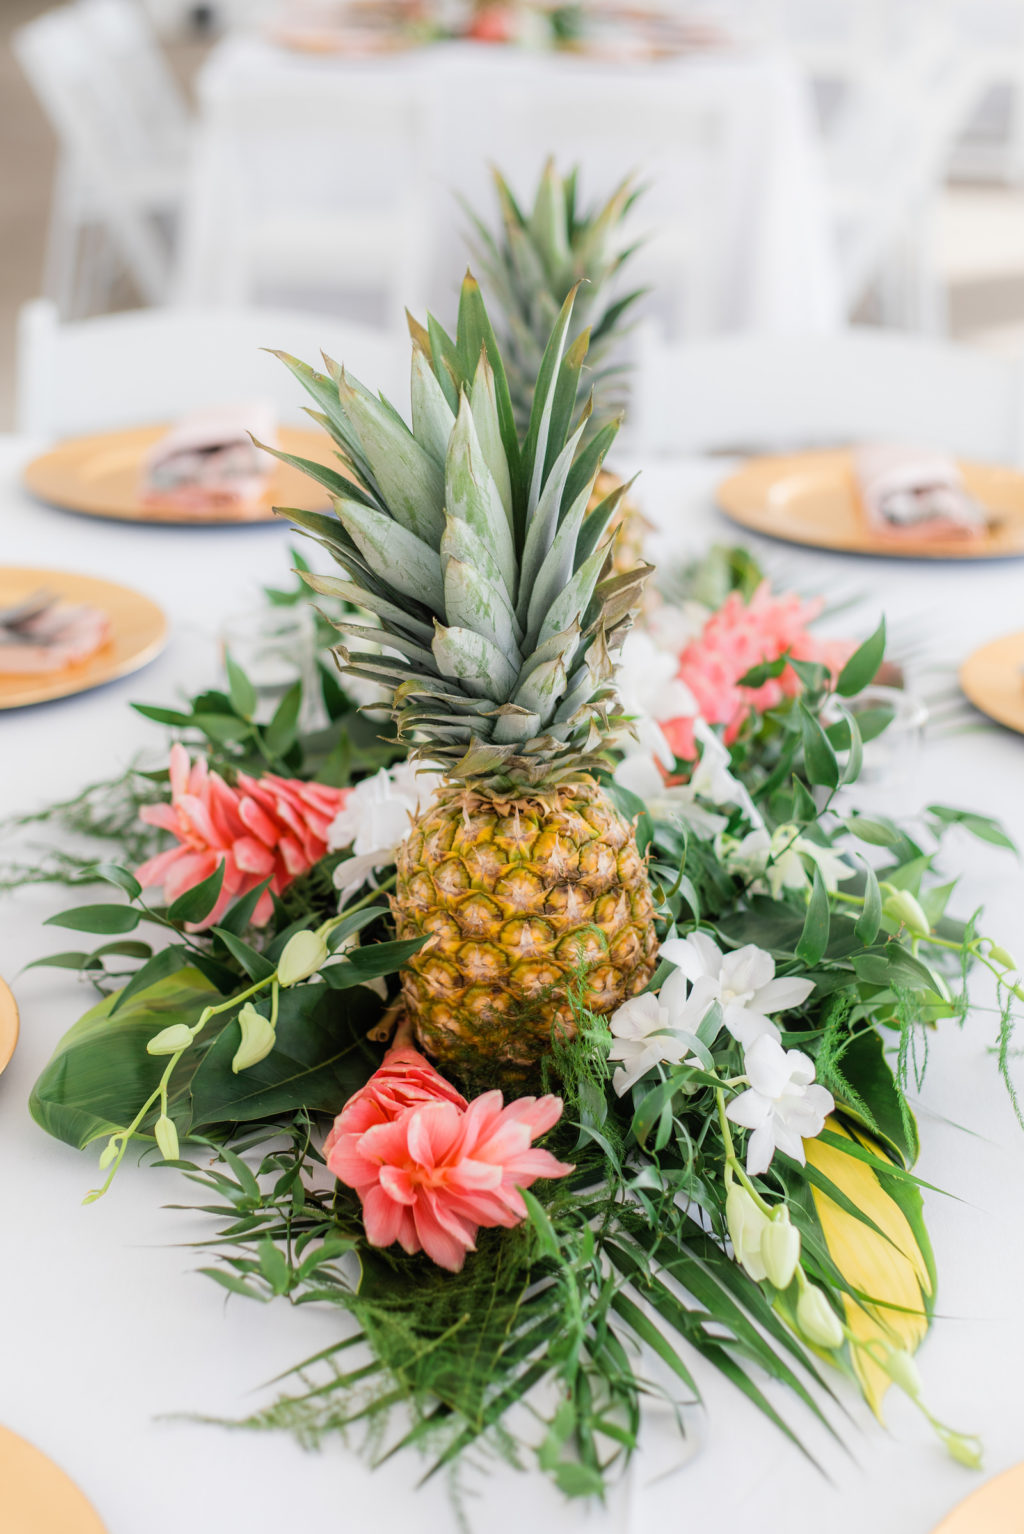 Elegant Tropical Wedding Reception Decor, Pineapples, Palm Fronds, Pink Ginger Floral Centerpiece, Gold Chargers | Tampa Bay Wedding Florist Iza's Flowers